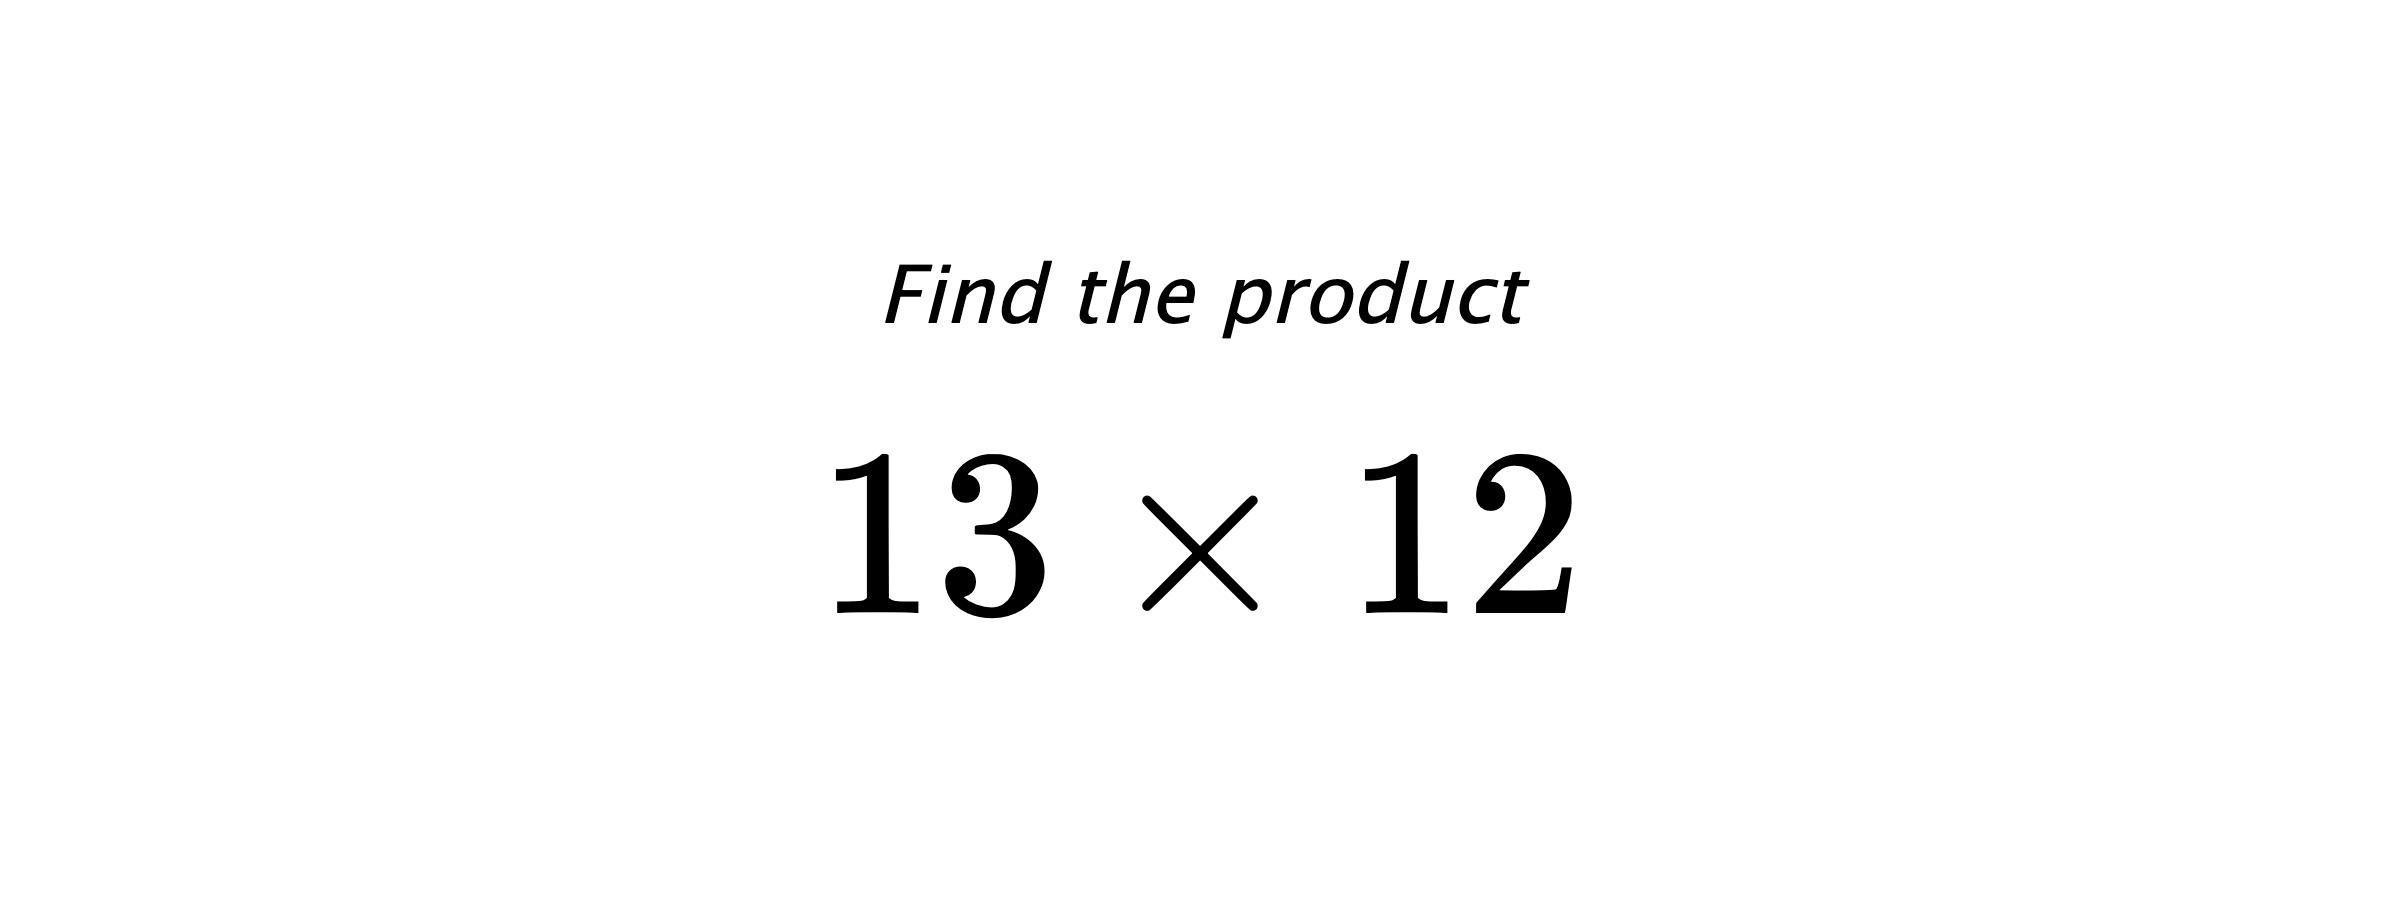 Find the product $ 13 \times 12 $